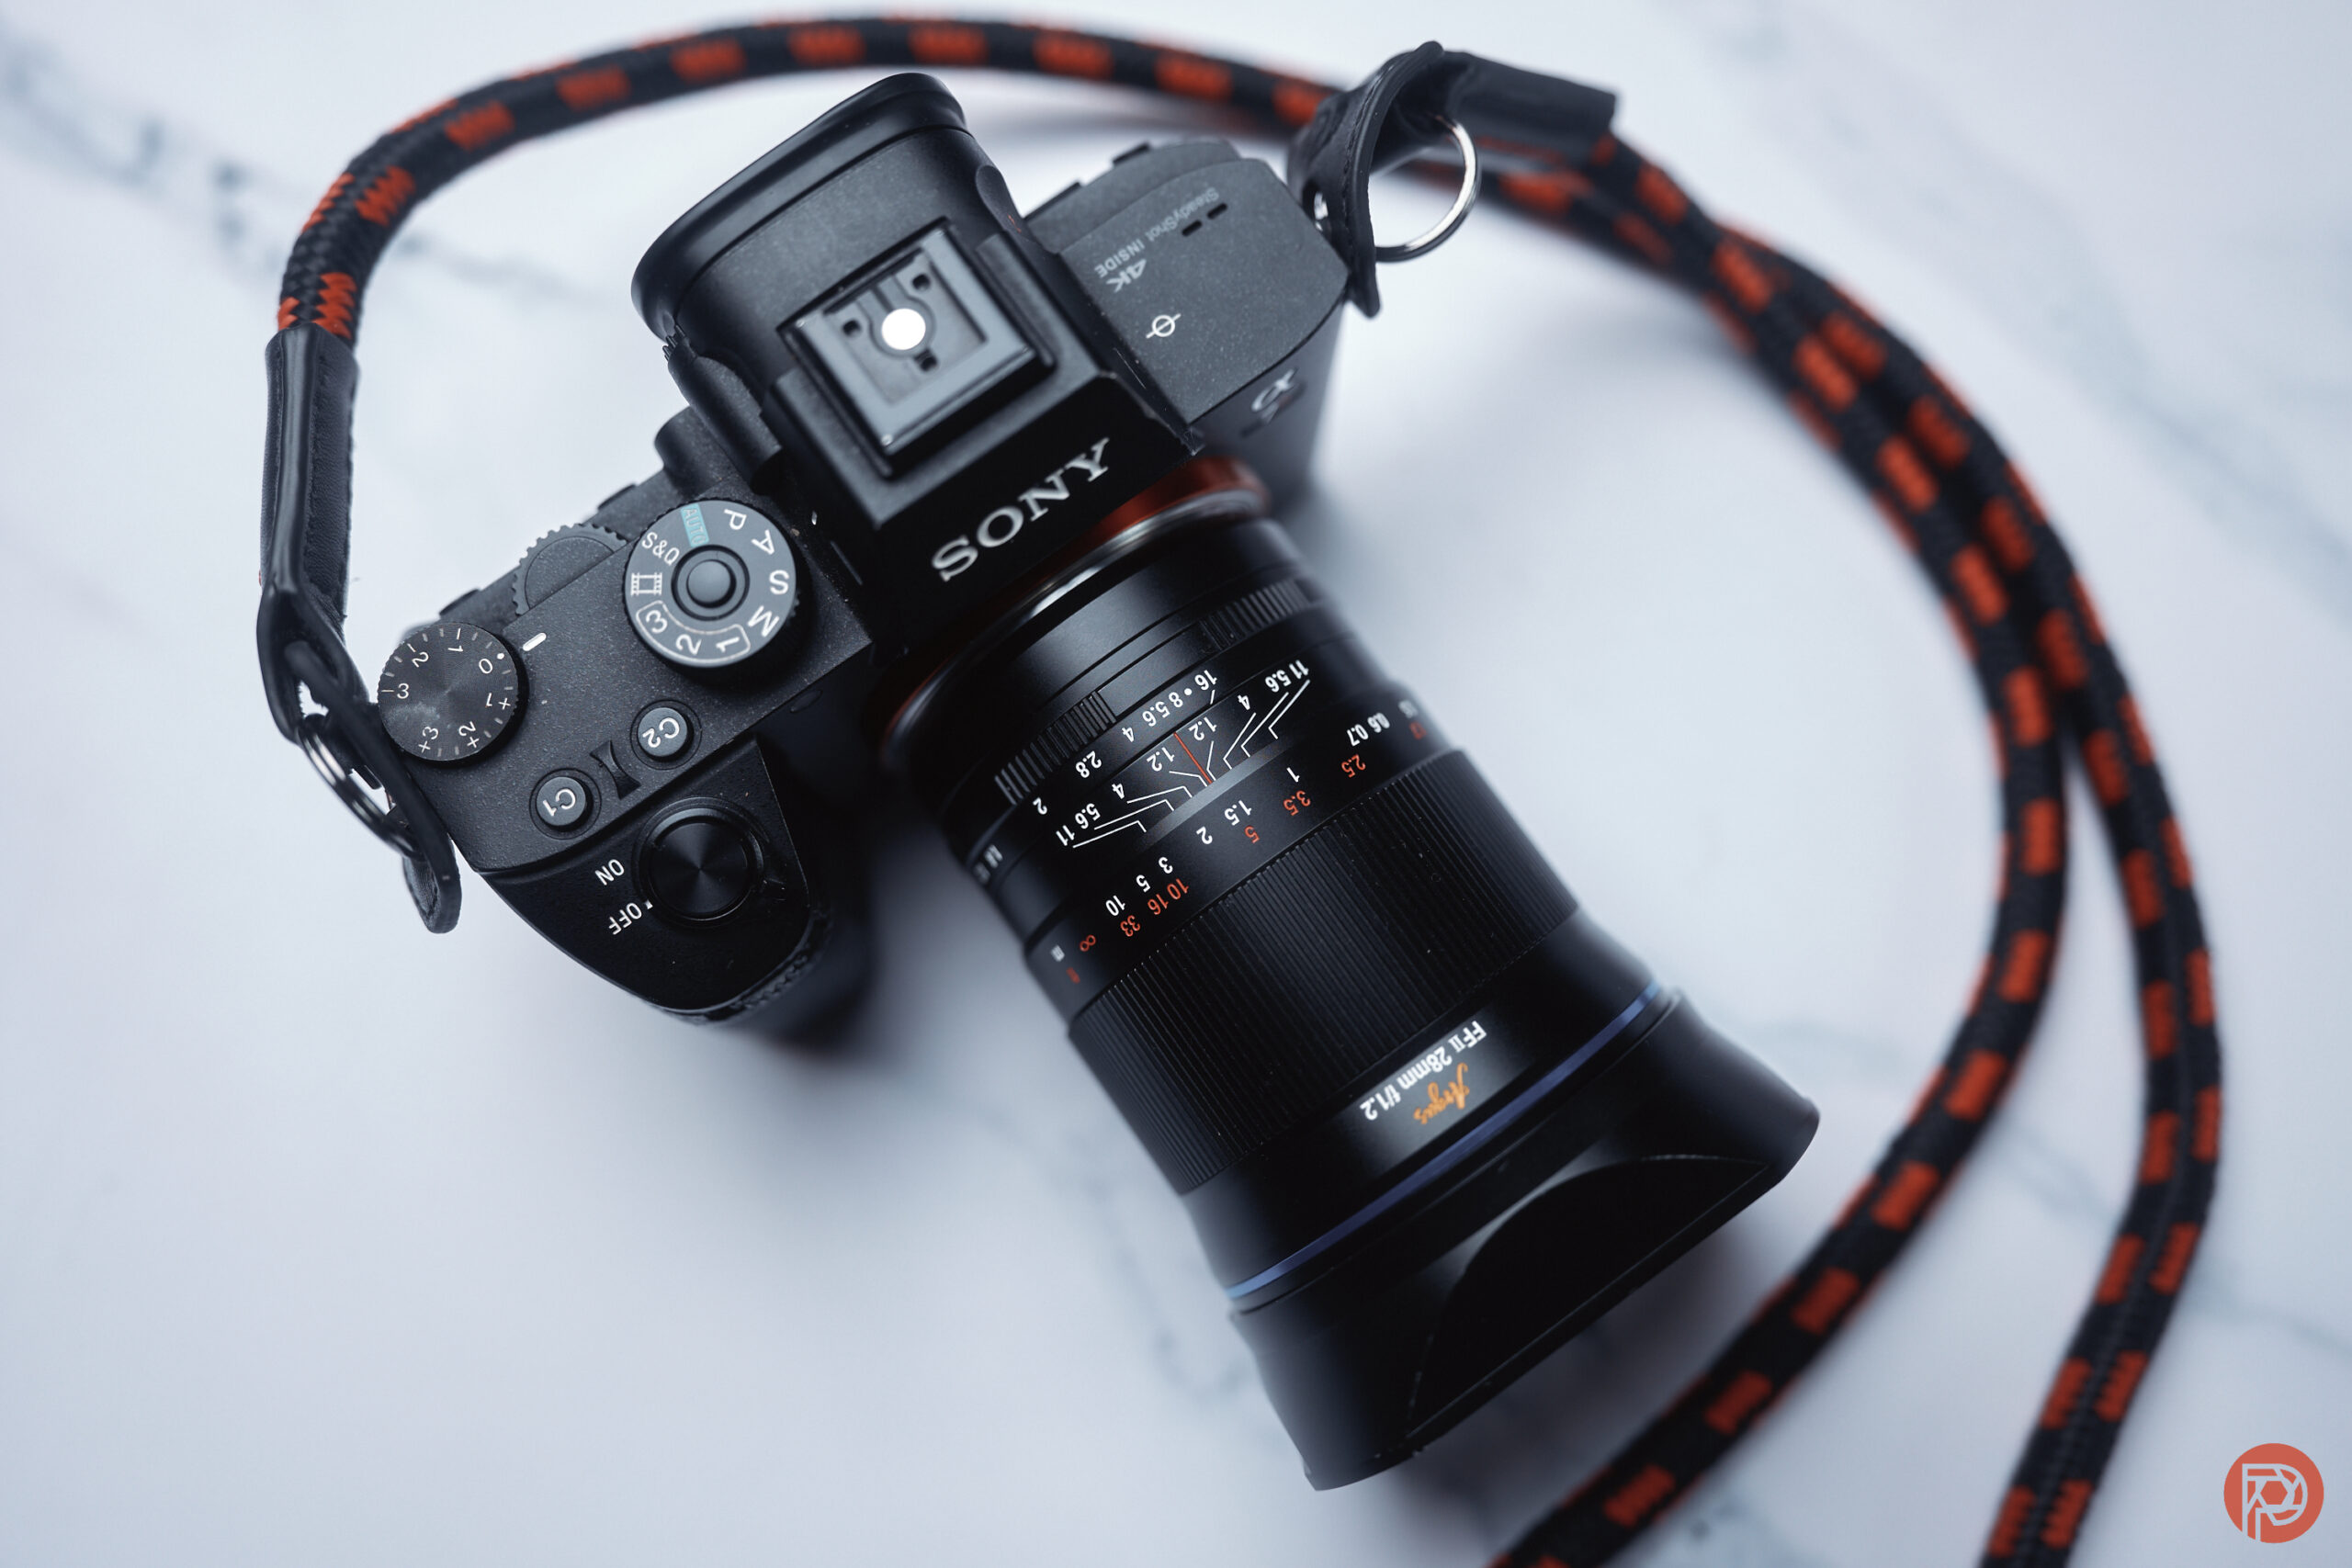 Chris Gampat The Phoblographer Laowa 28mm f1.2 review product images 21-250s400